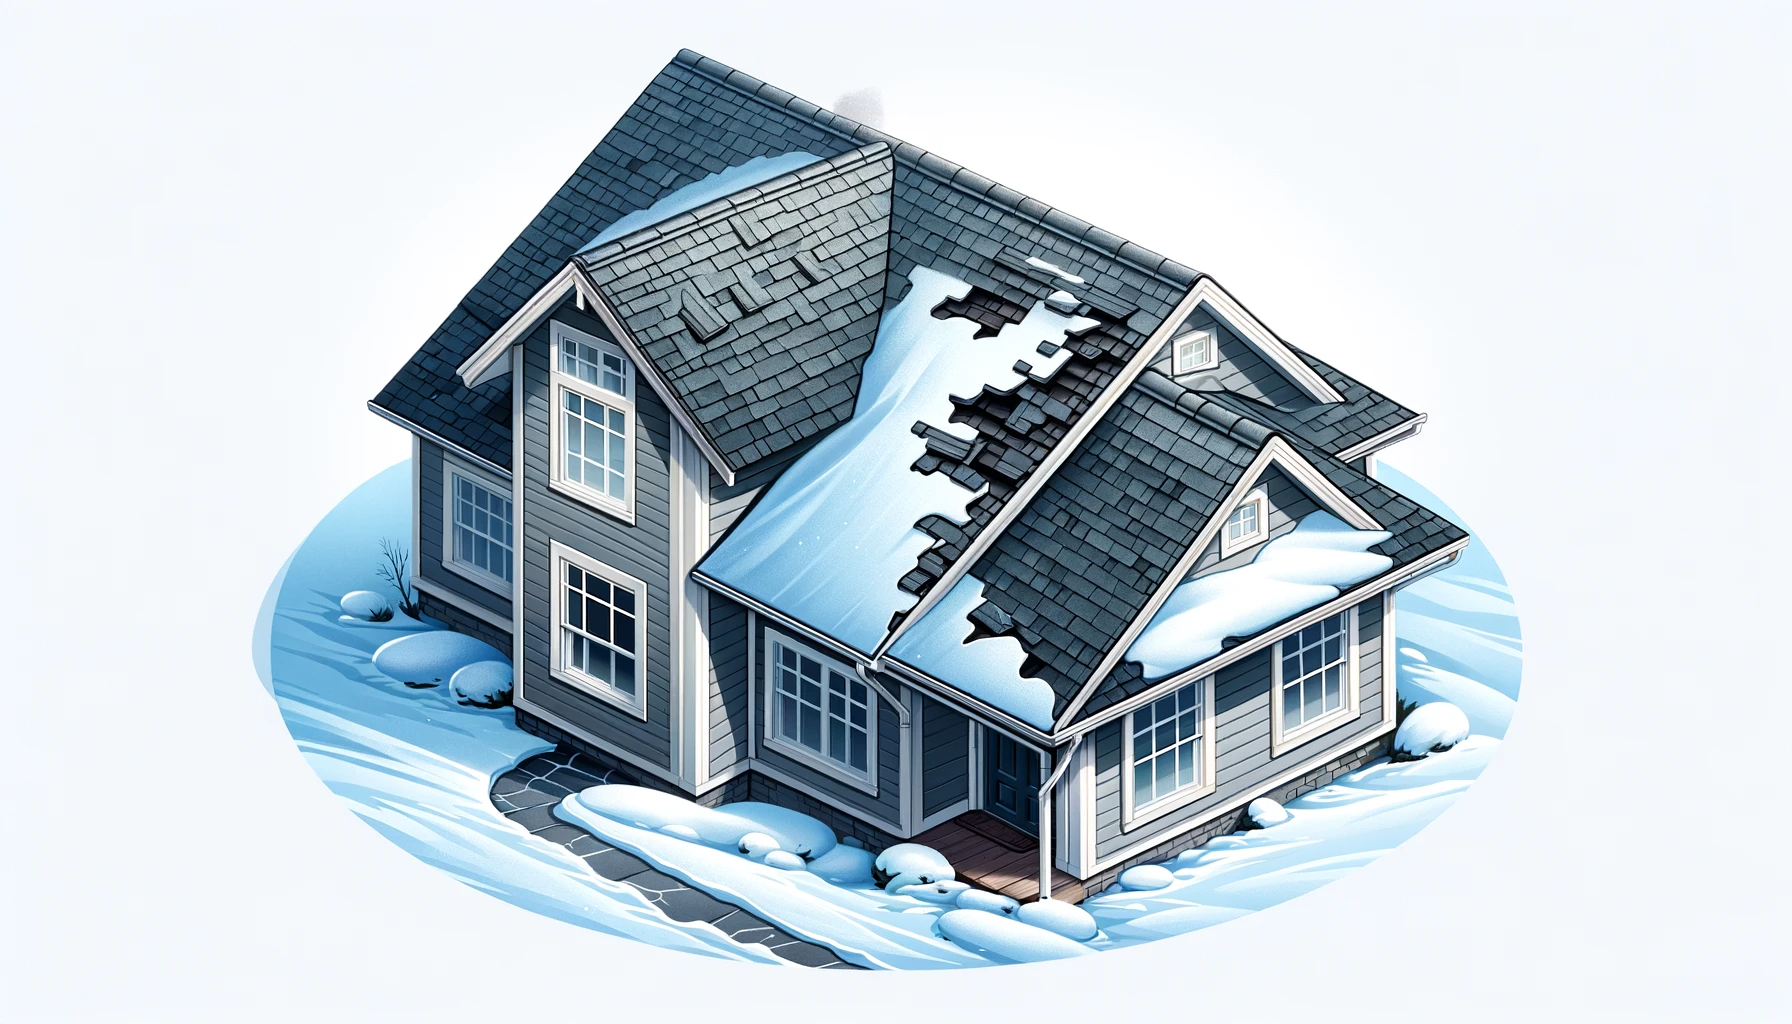 house in the snow with damaged shingles 